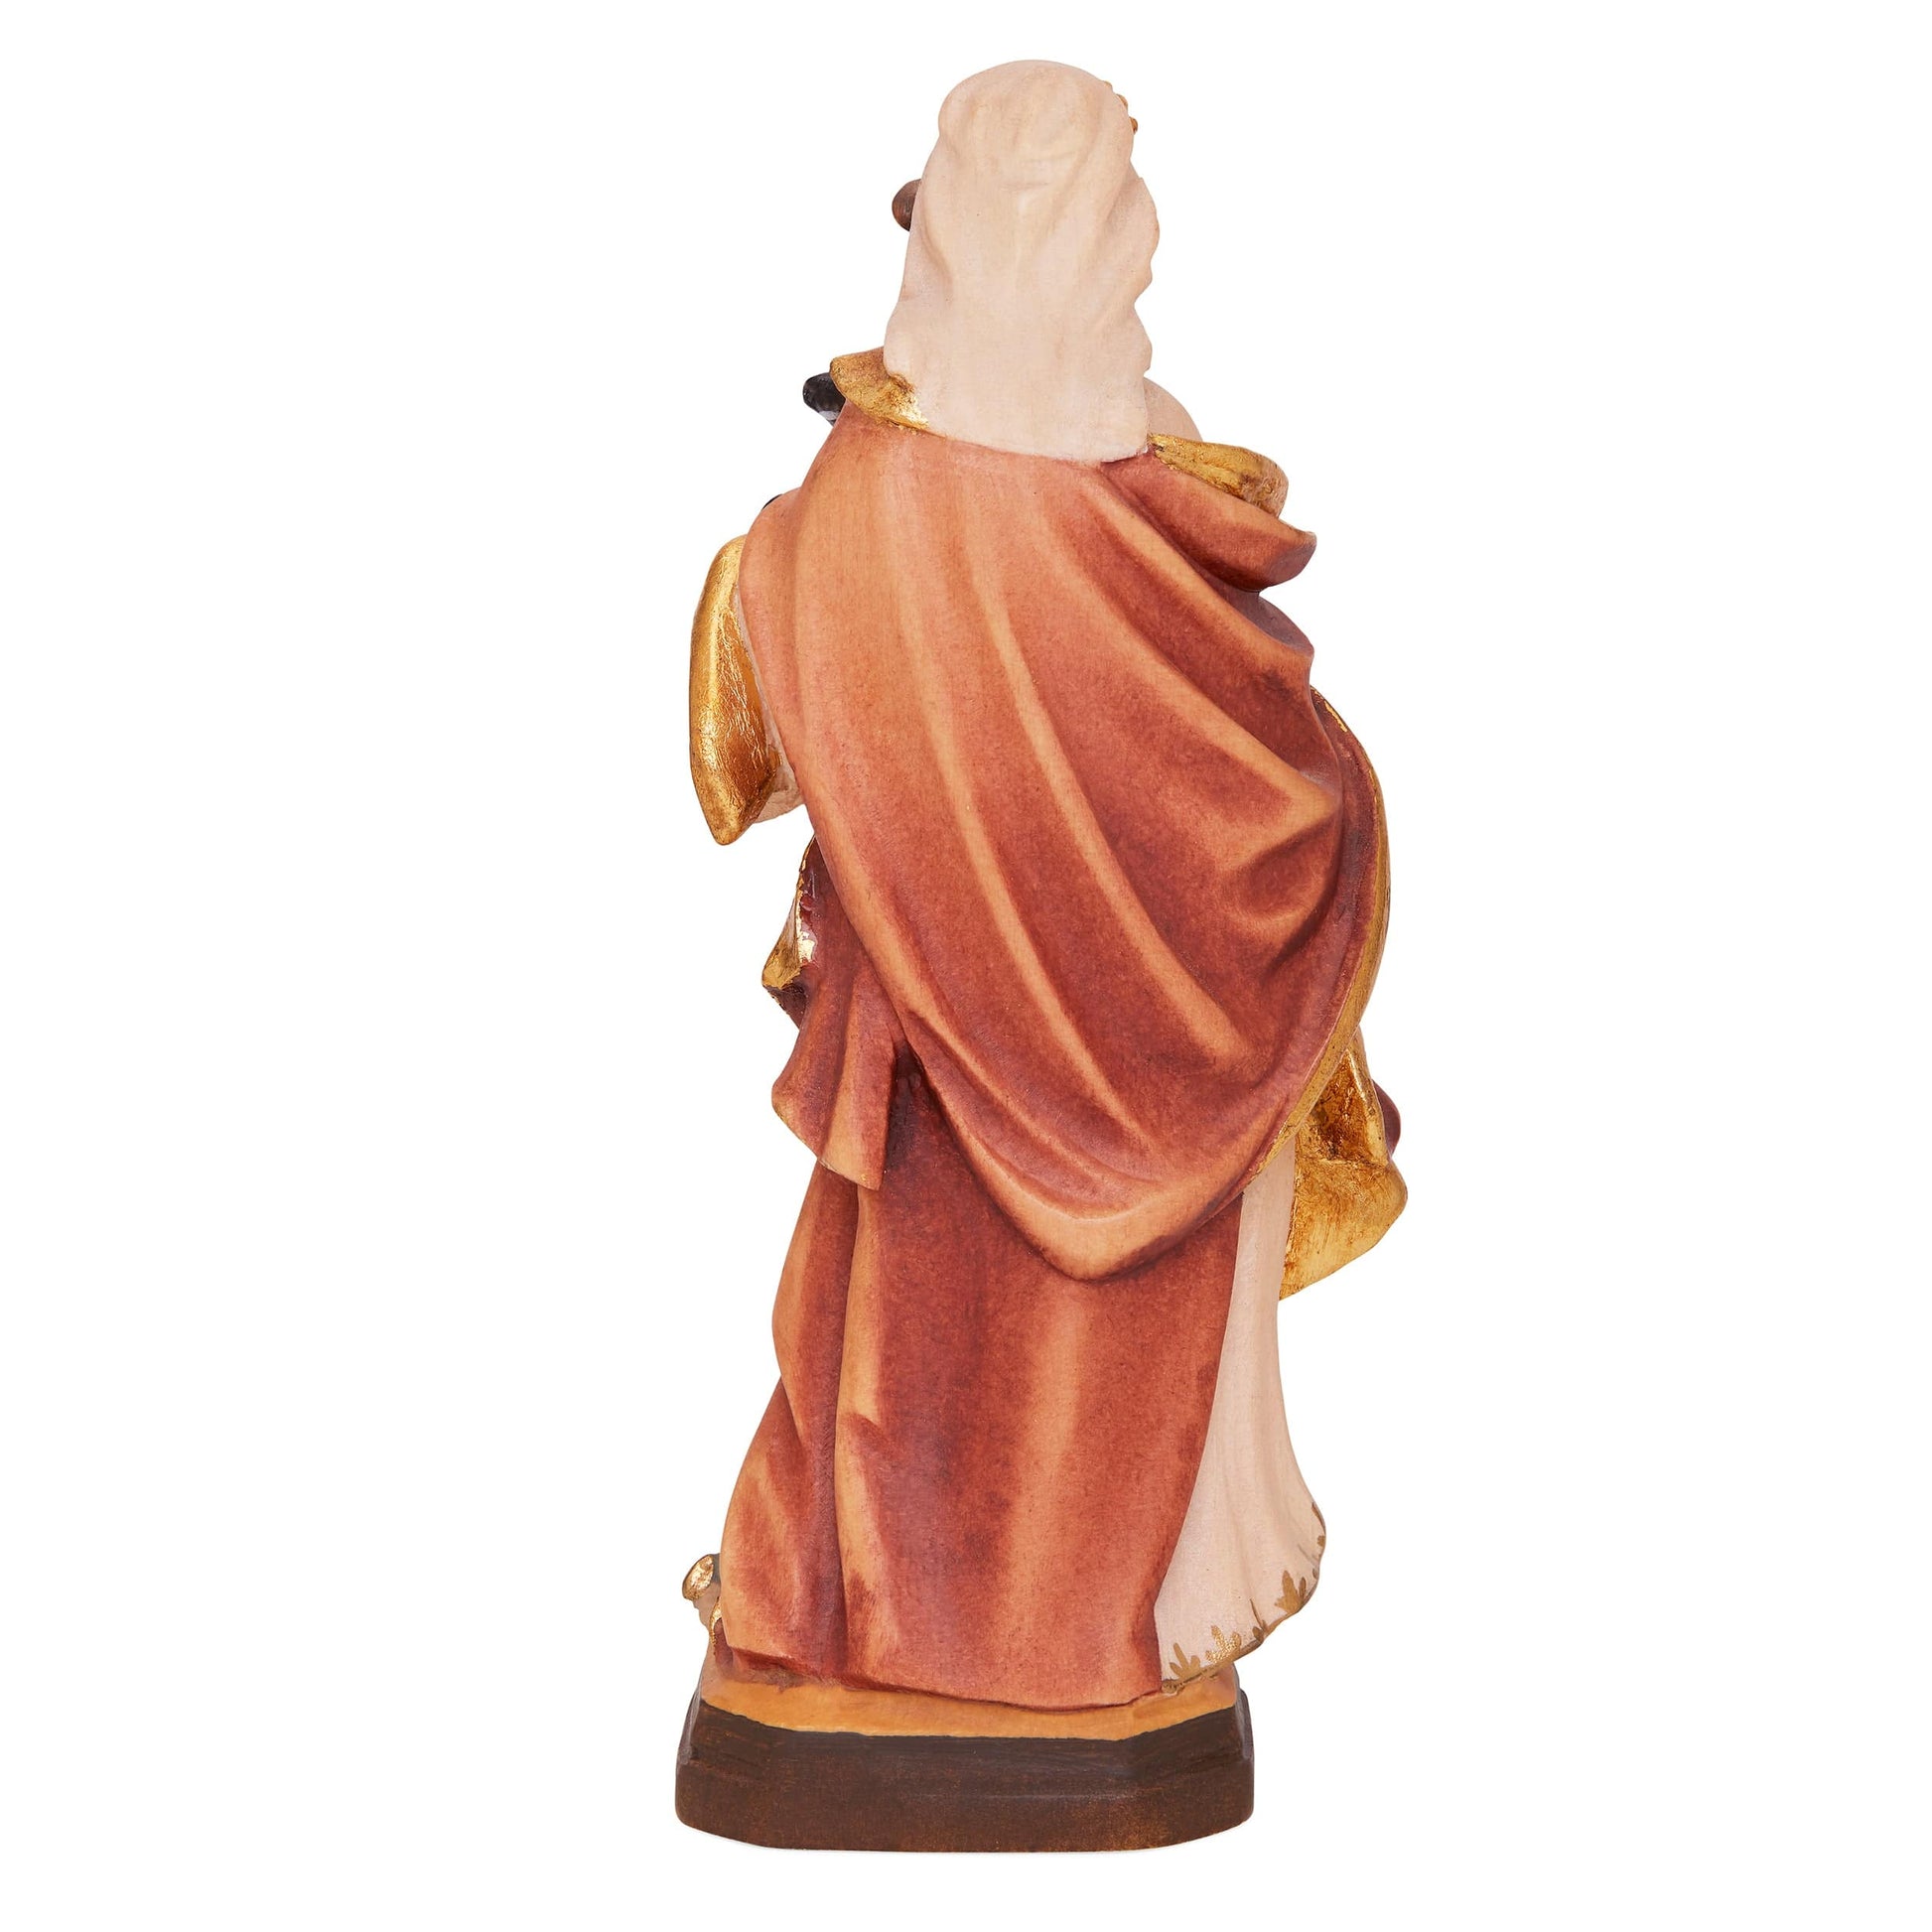 MONDO CATTOLICO 15 cm (5.90 in) Wooden Statue of St. Mary Magdalene